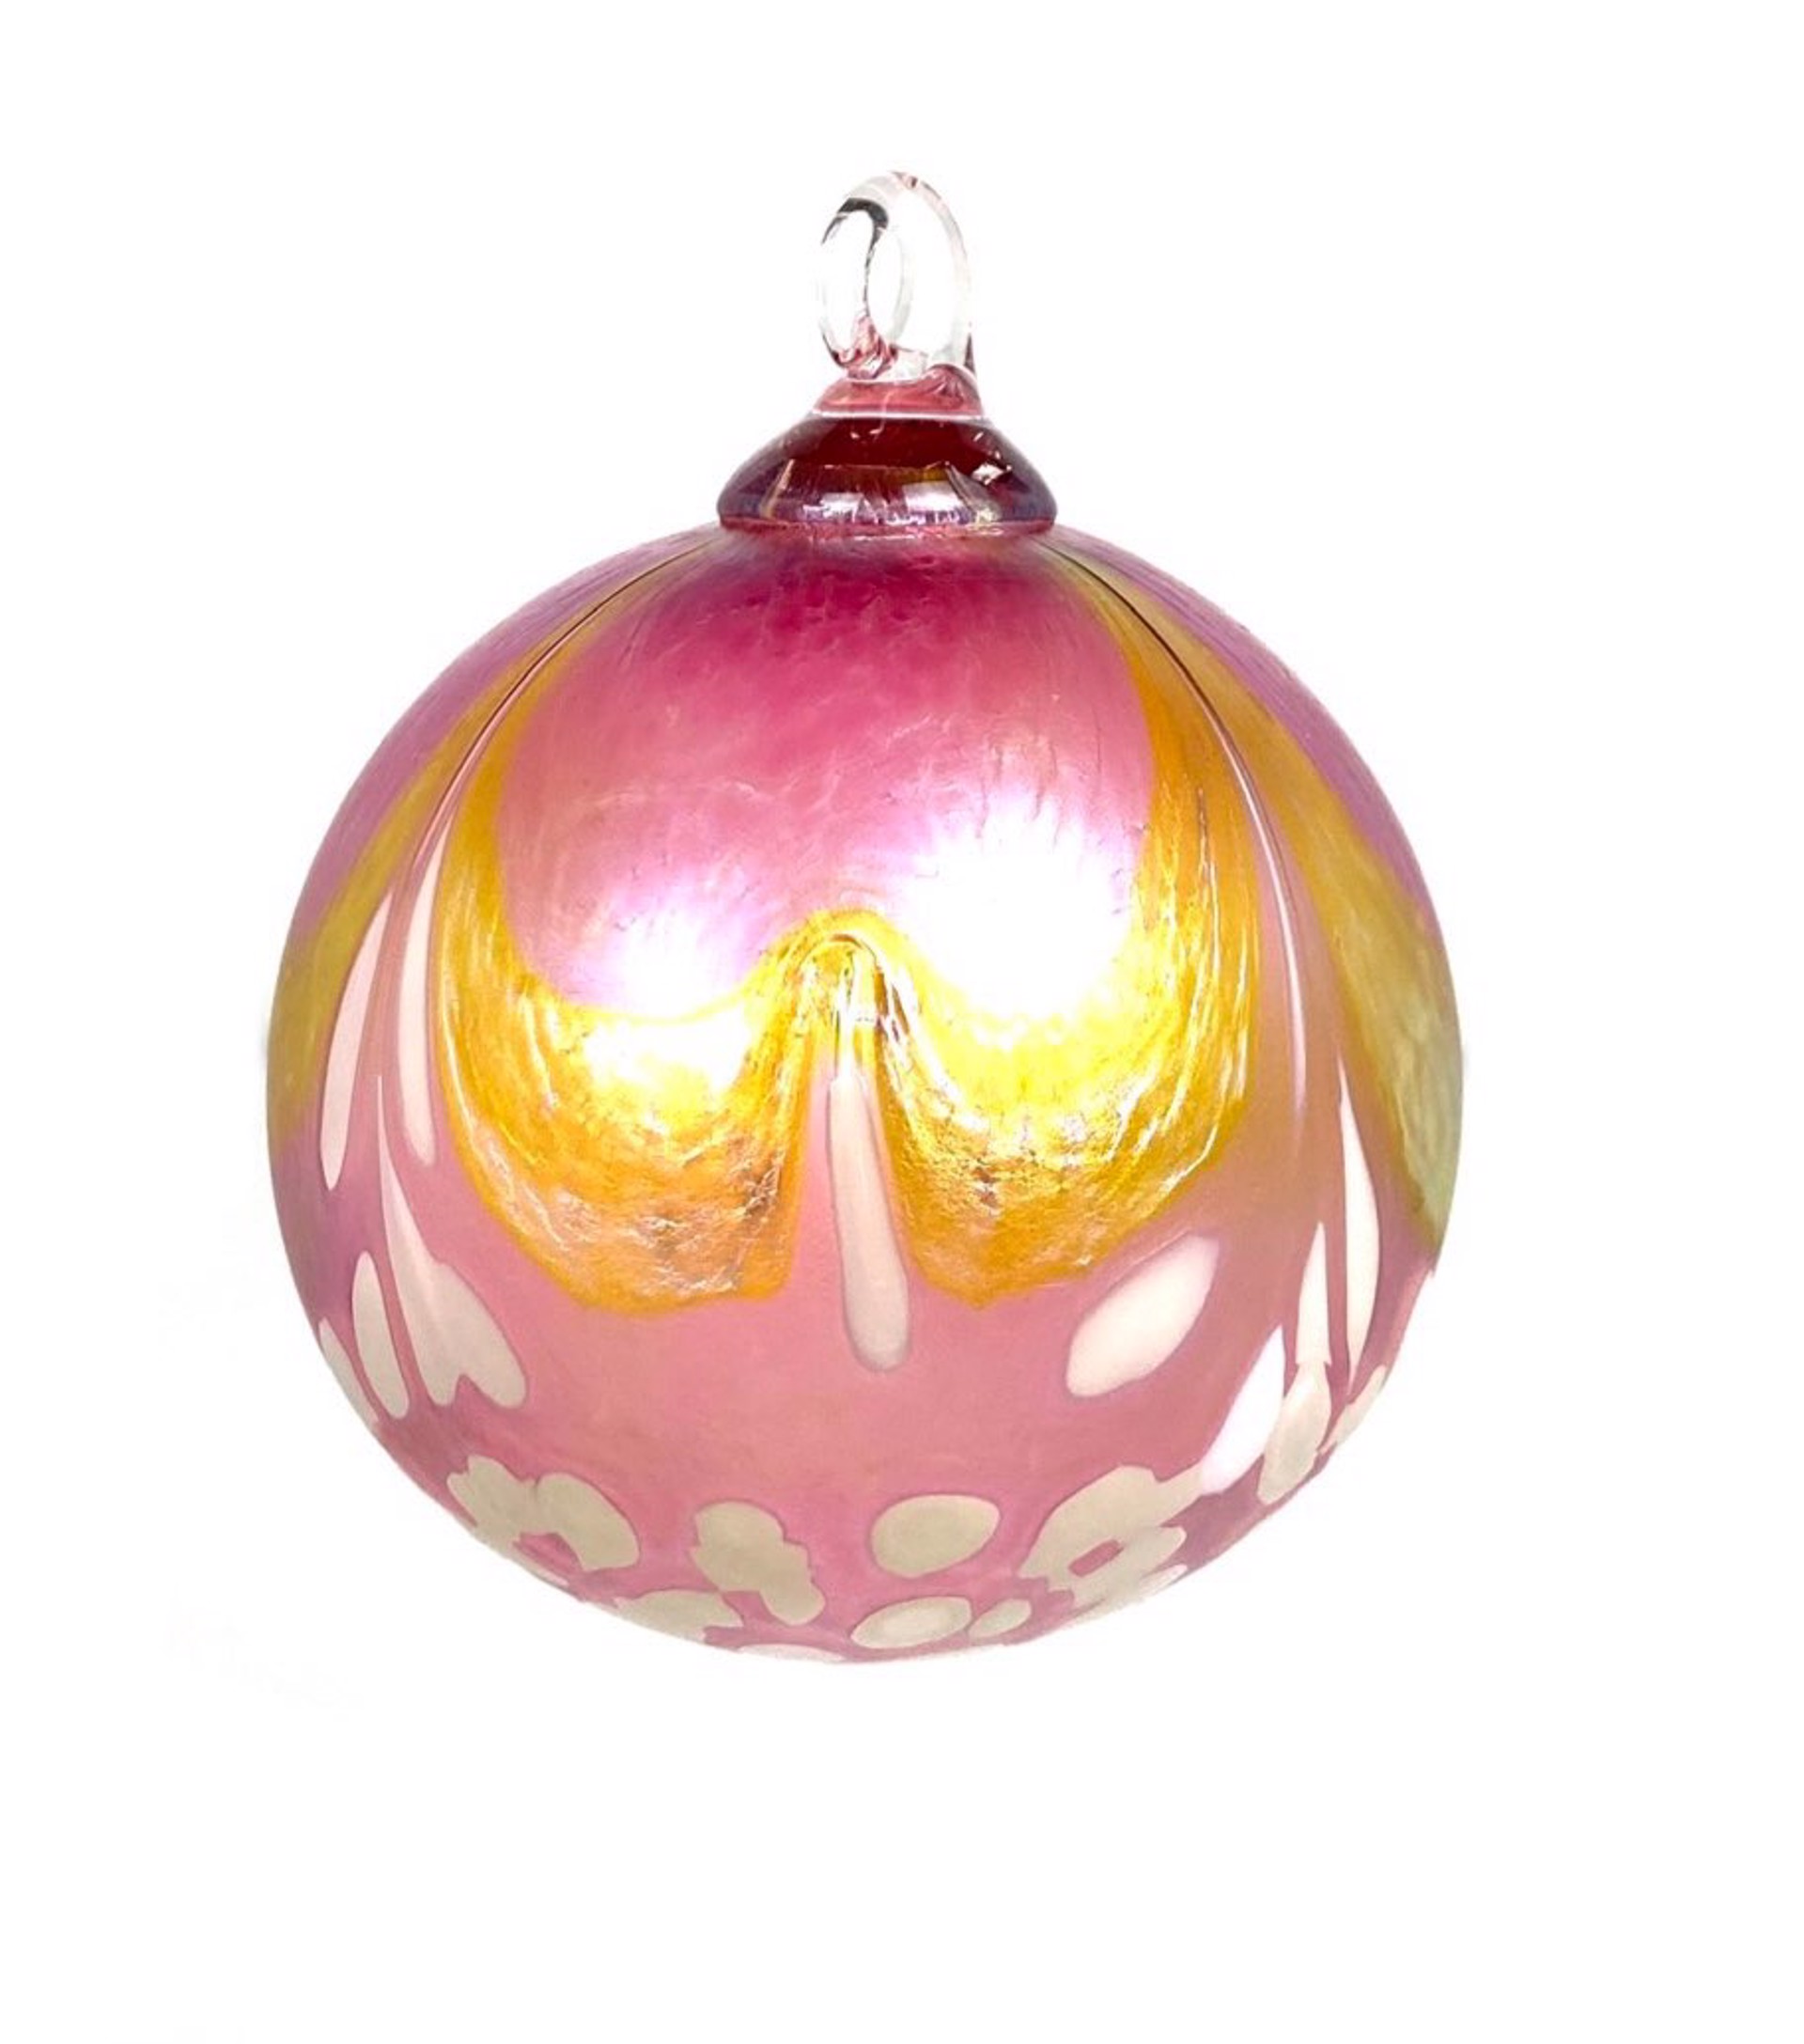 Artisan Punch Pink Ornament by Furnace Glass